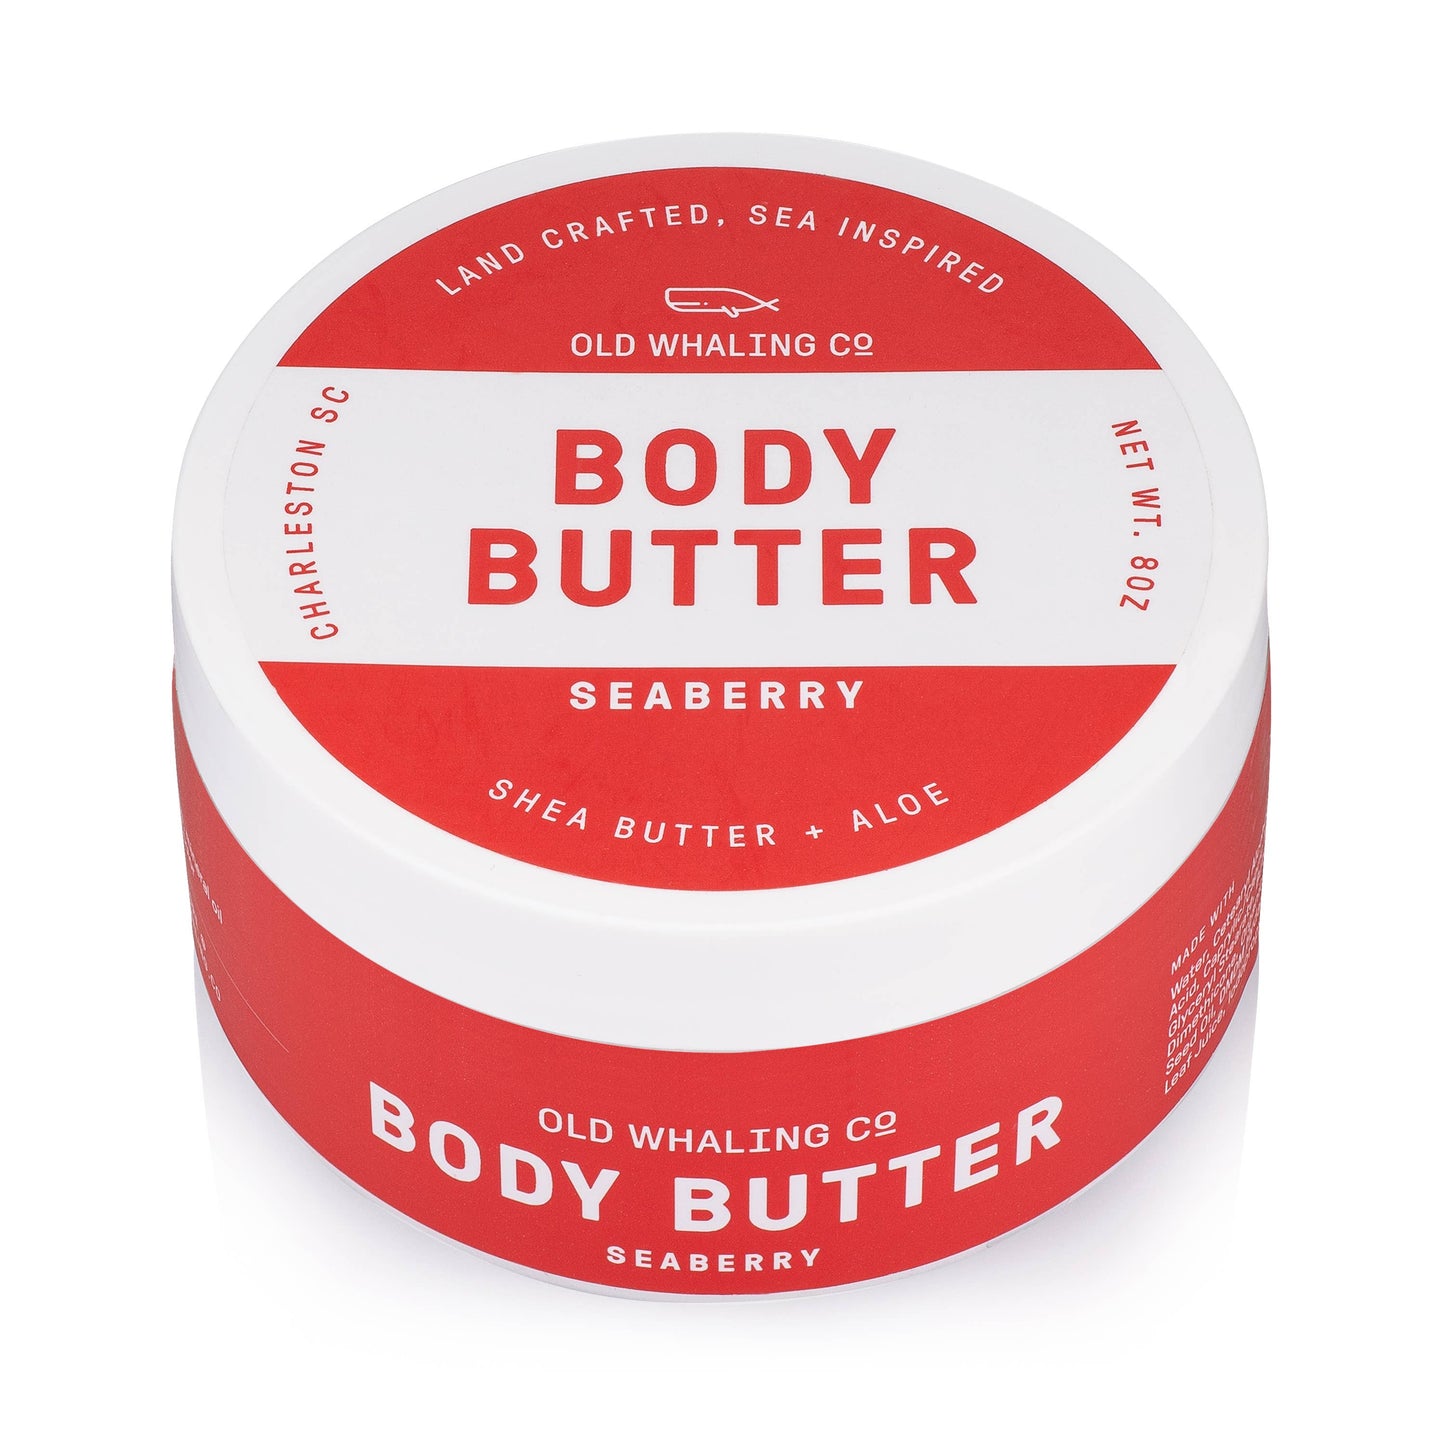 Old Whaling Company - Seaberry Body Butter (8oz)